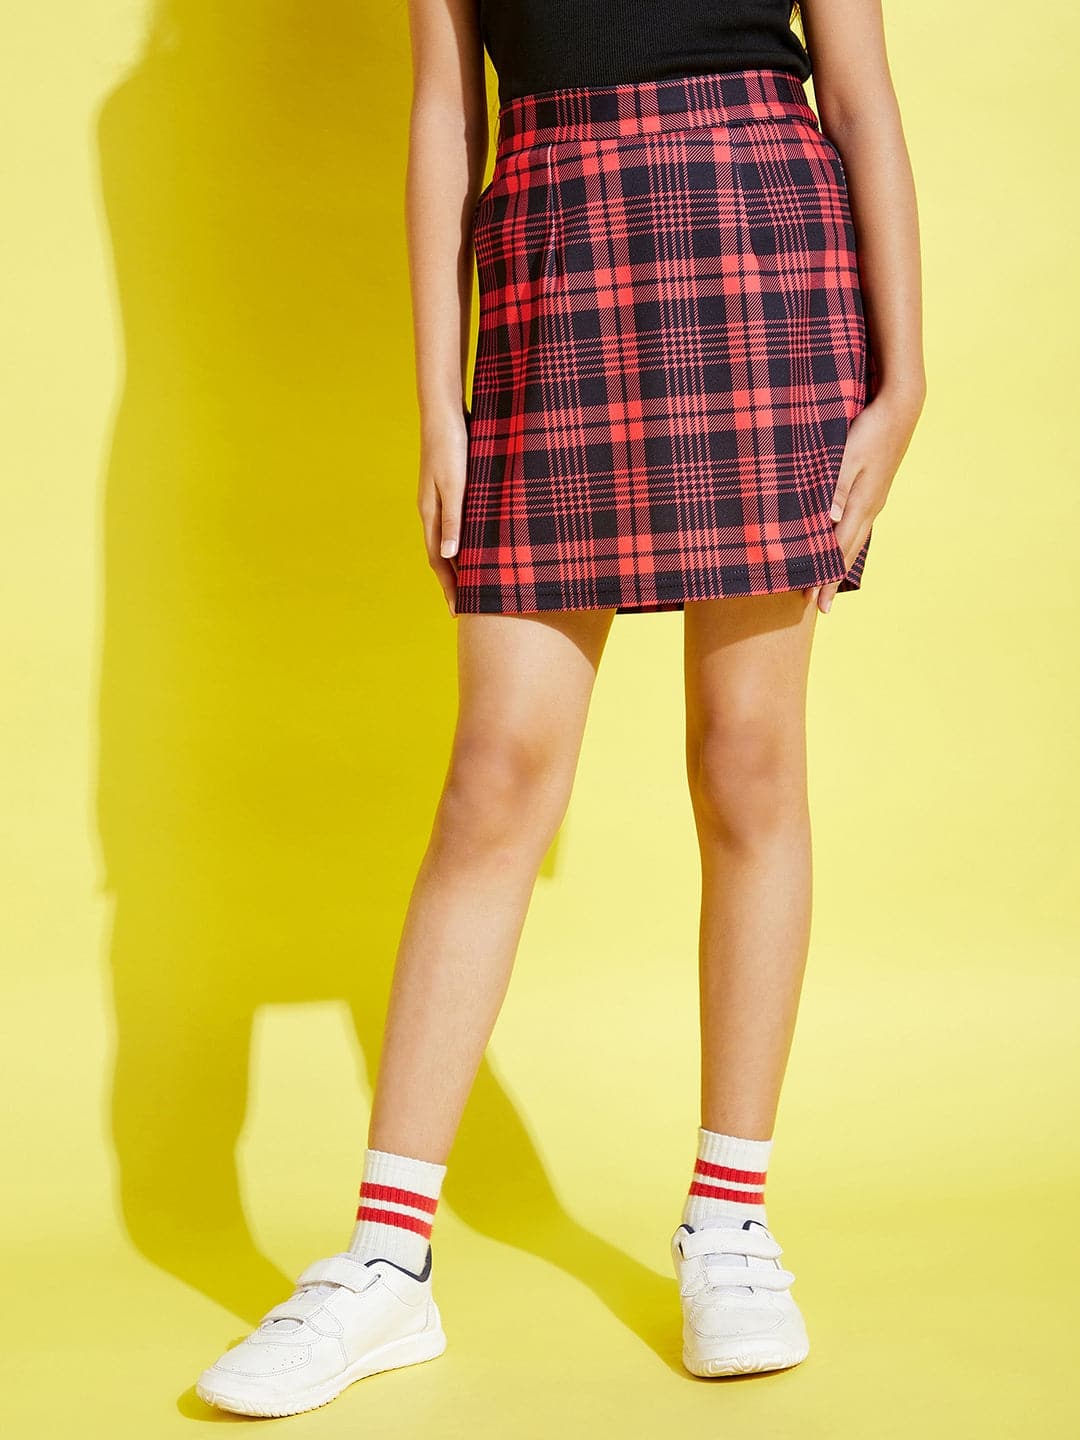 Red & Black Check A-Line Skirt-Noh.Voh